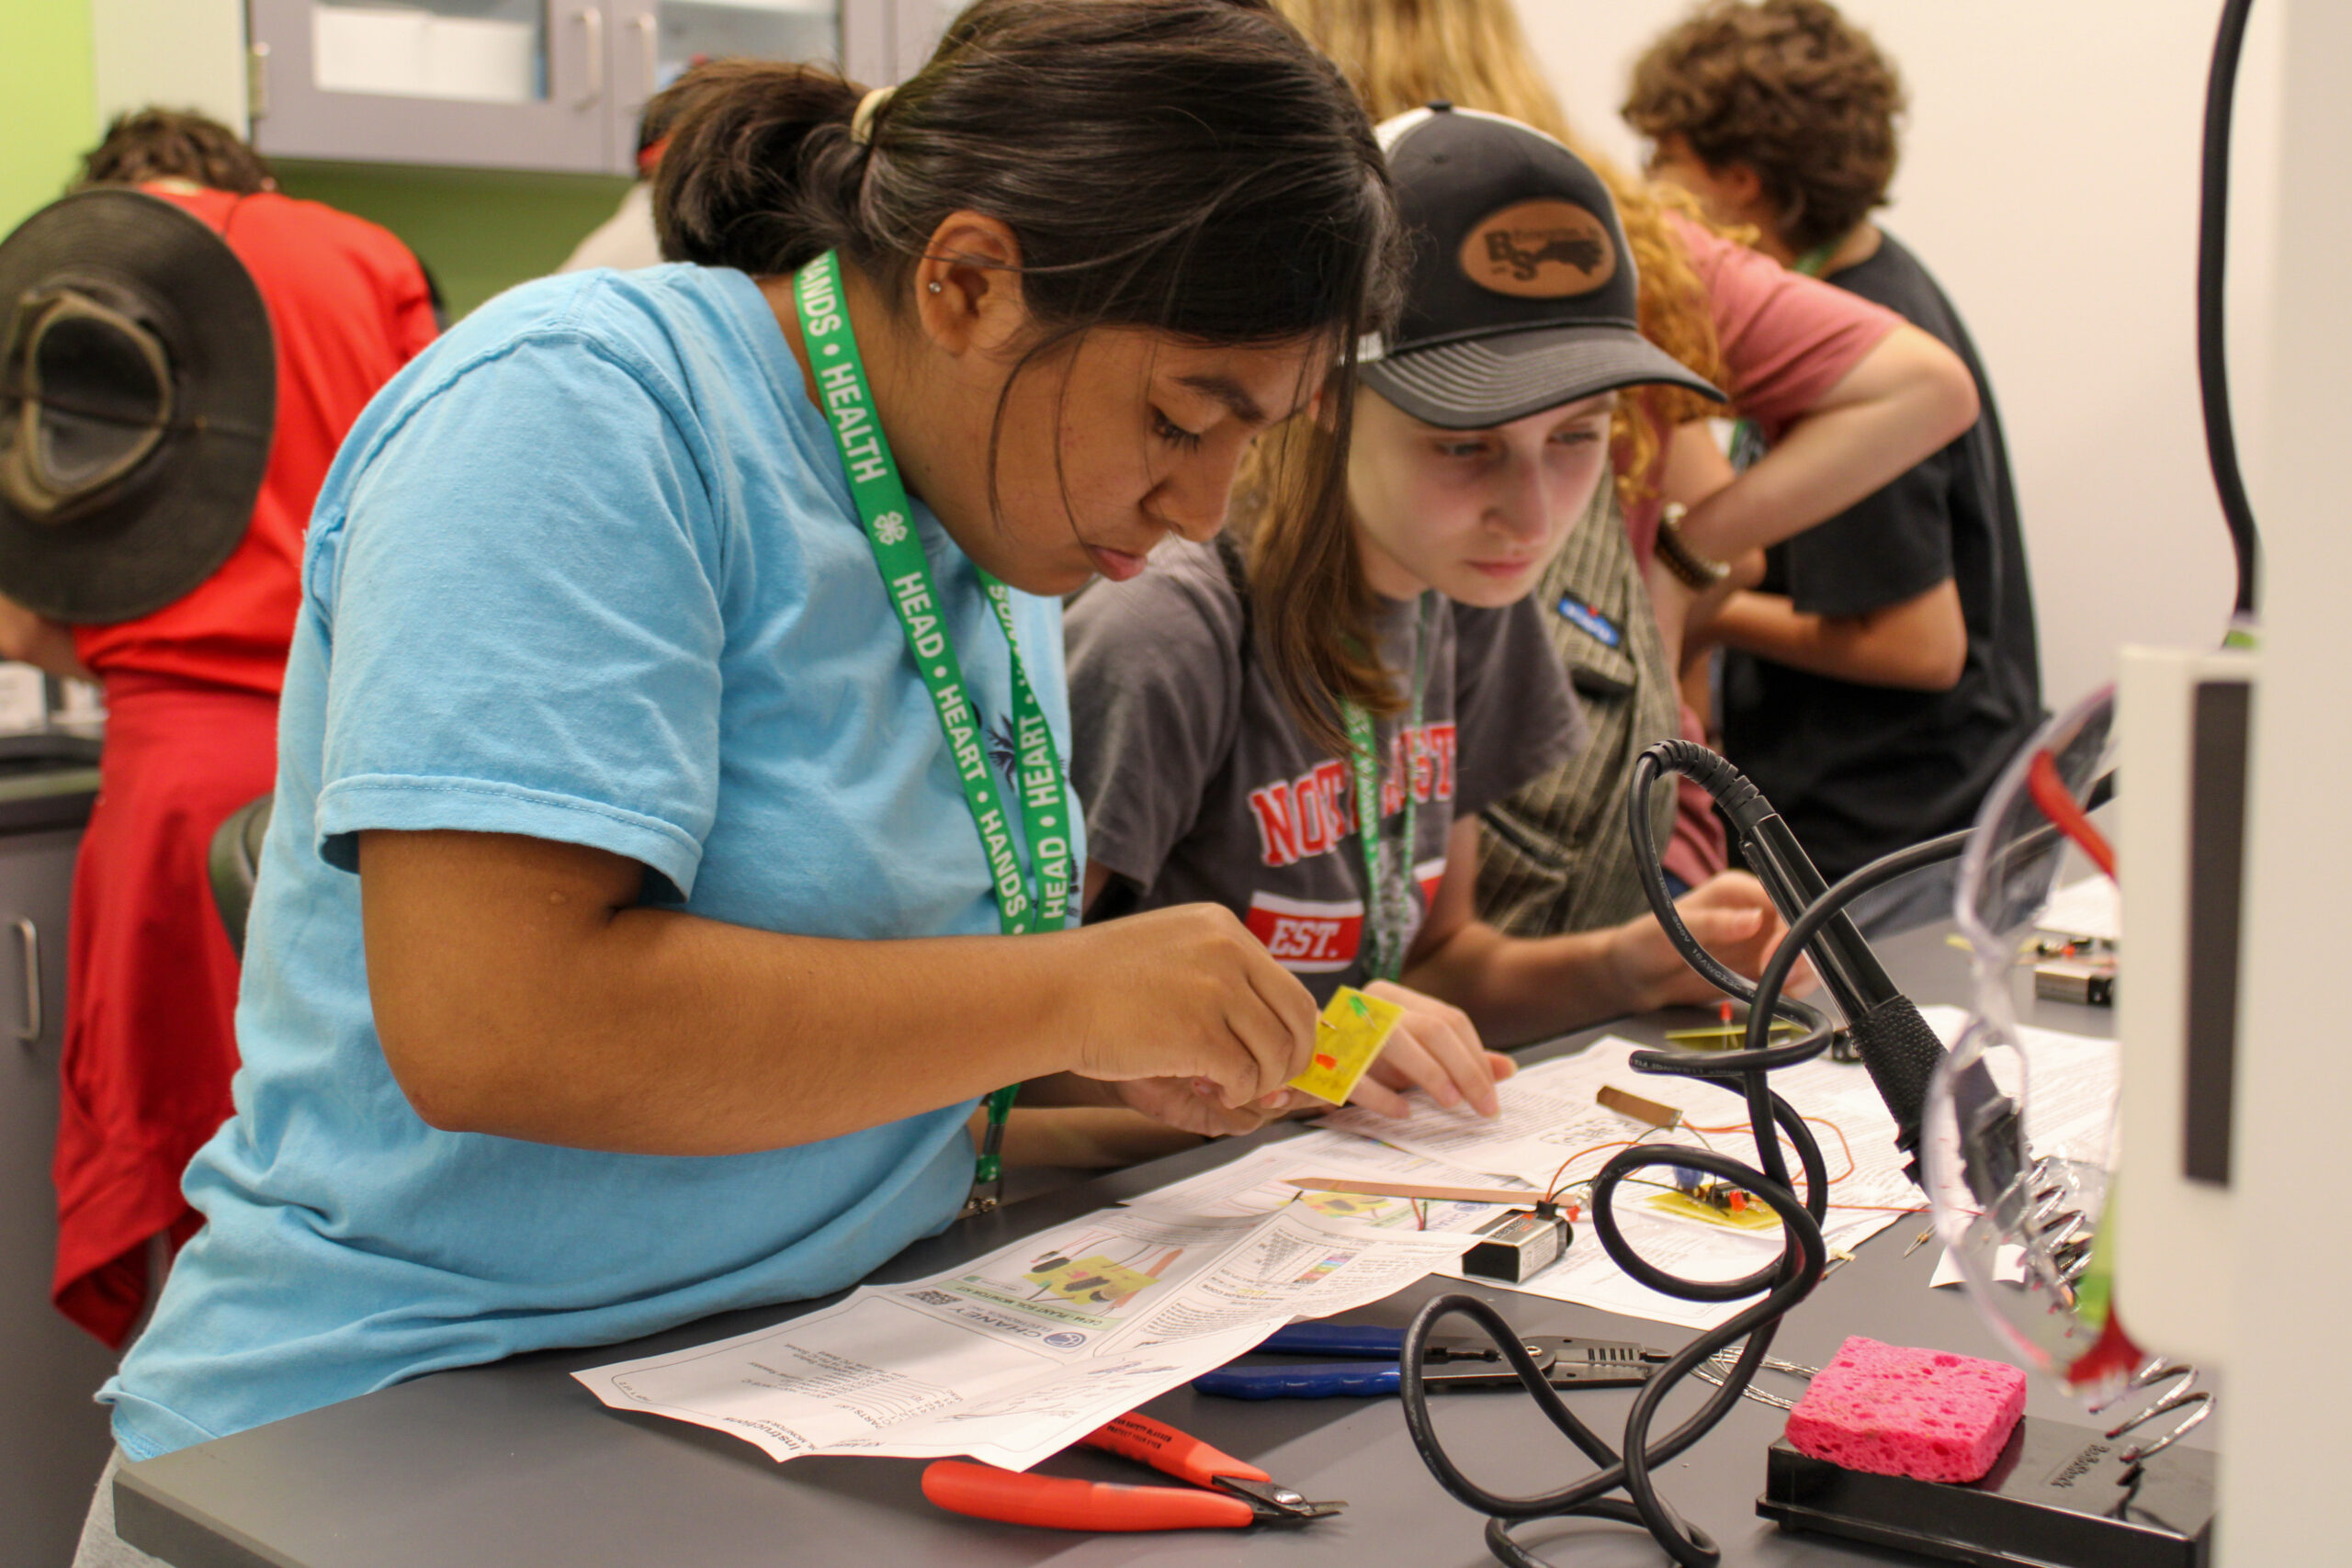 High school students from the Horticultural Science Summer Institute learn to make soil sensors in the N.C. PSI Demo Lab.